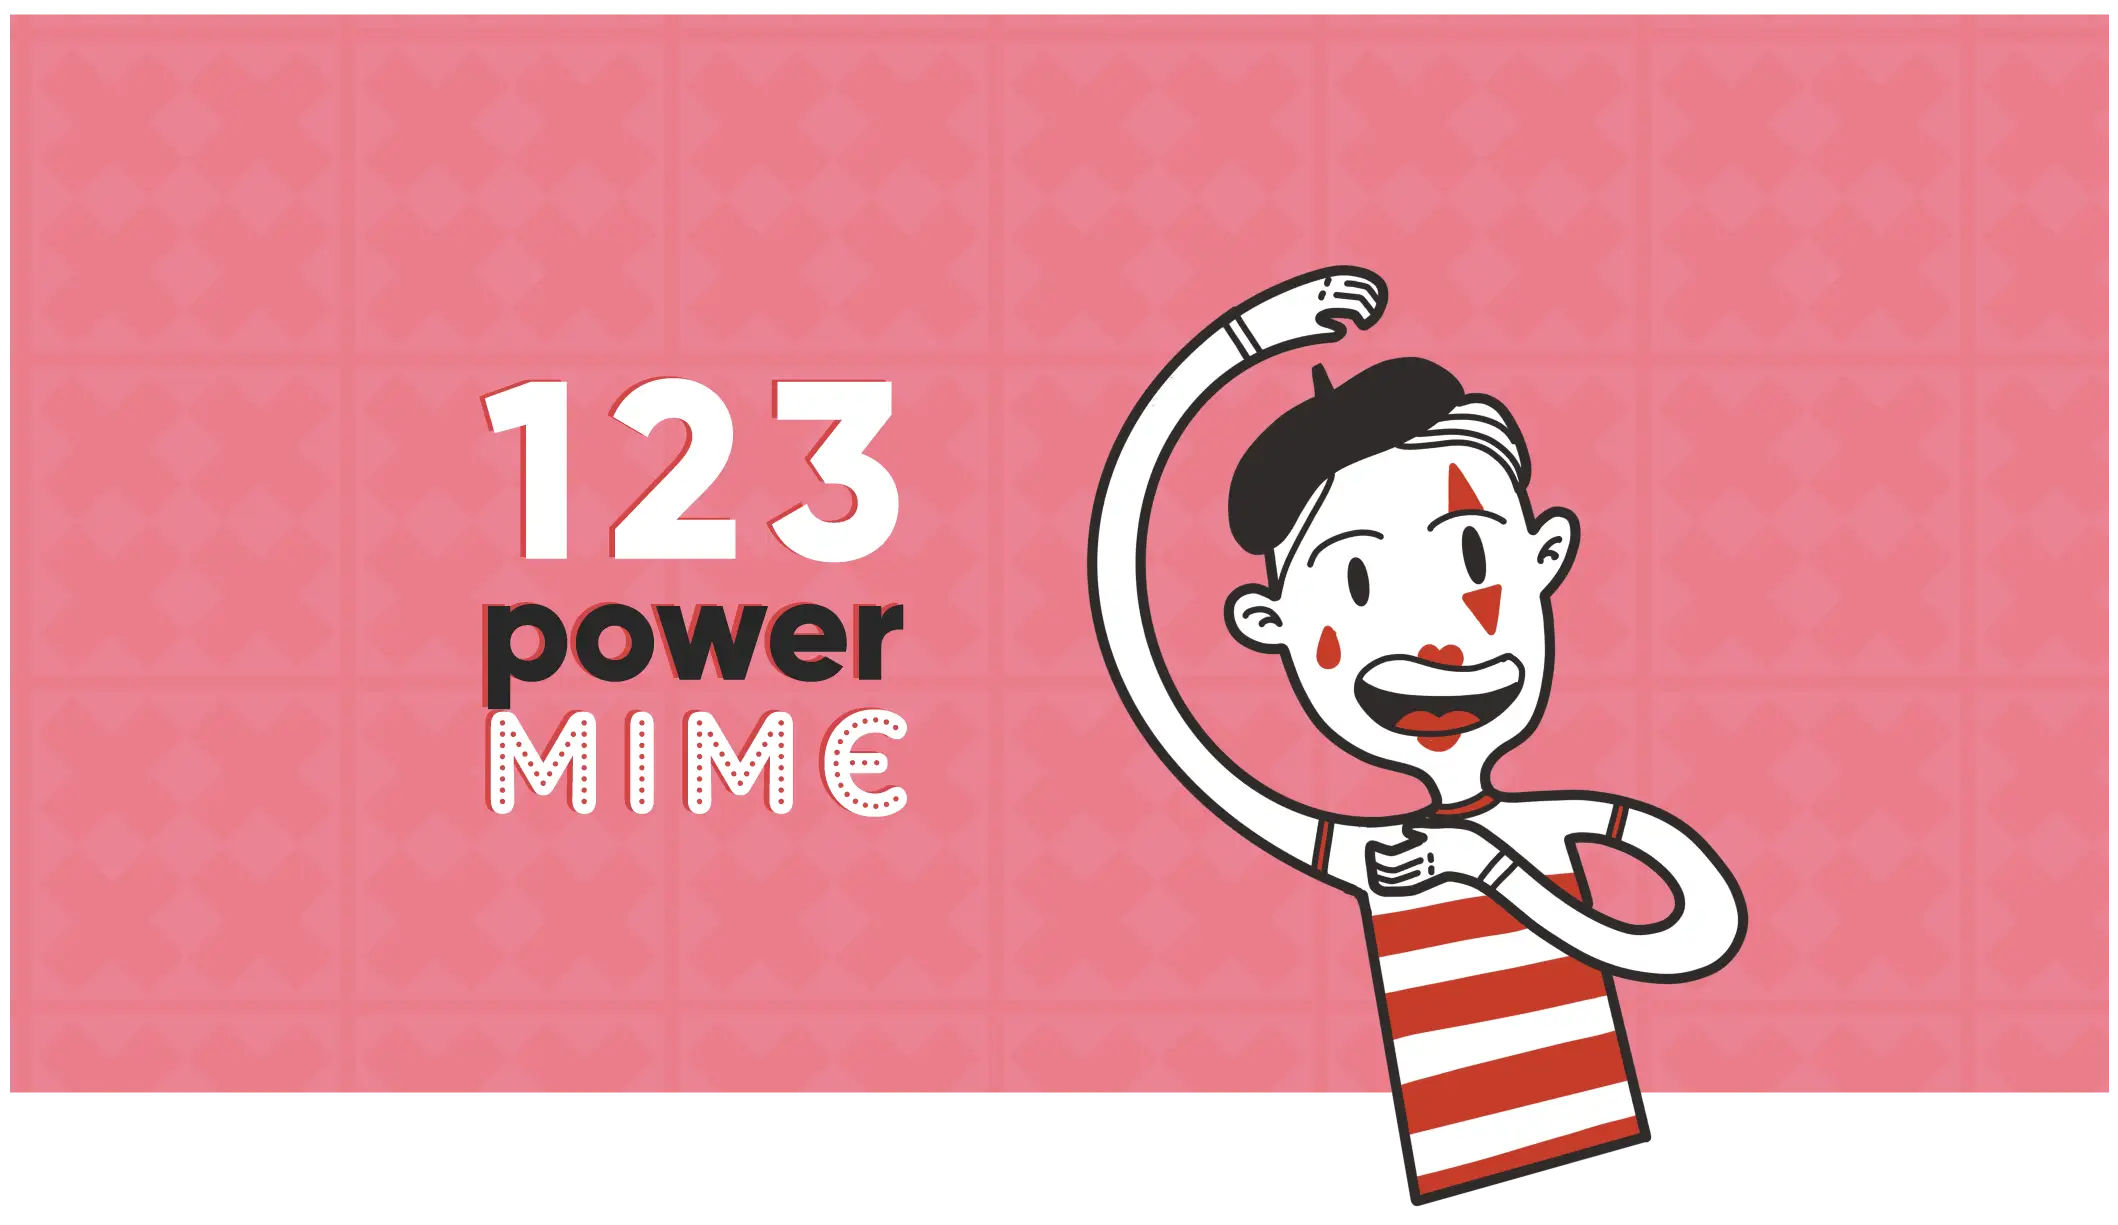 1 2 3 Power Mime!